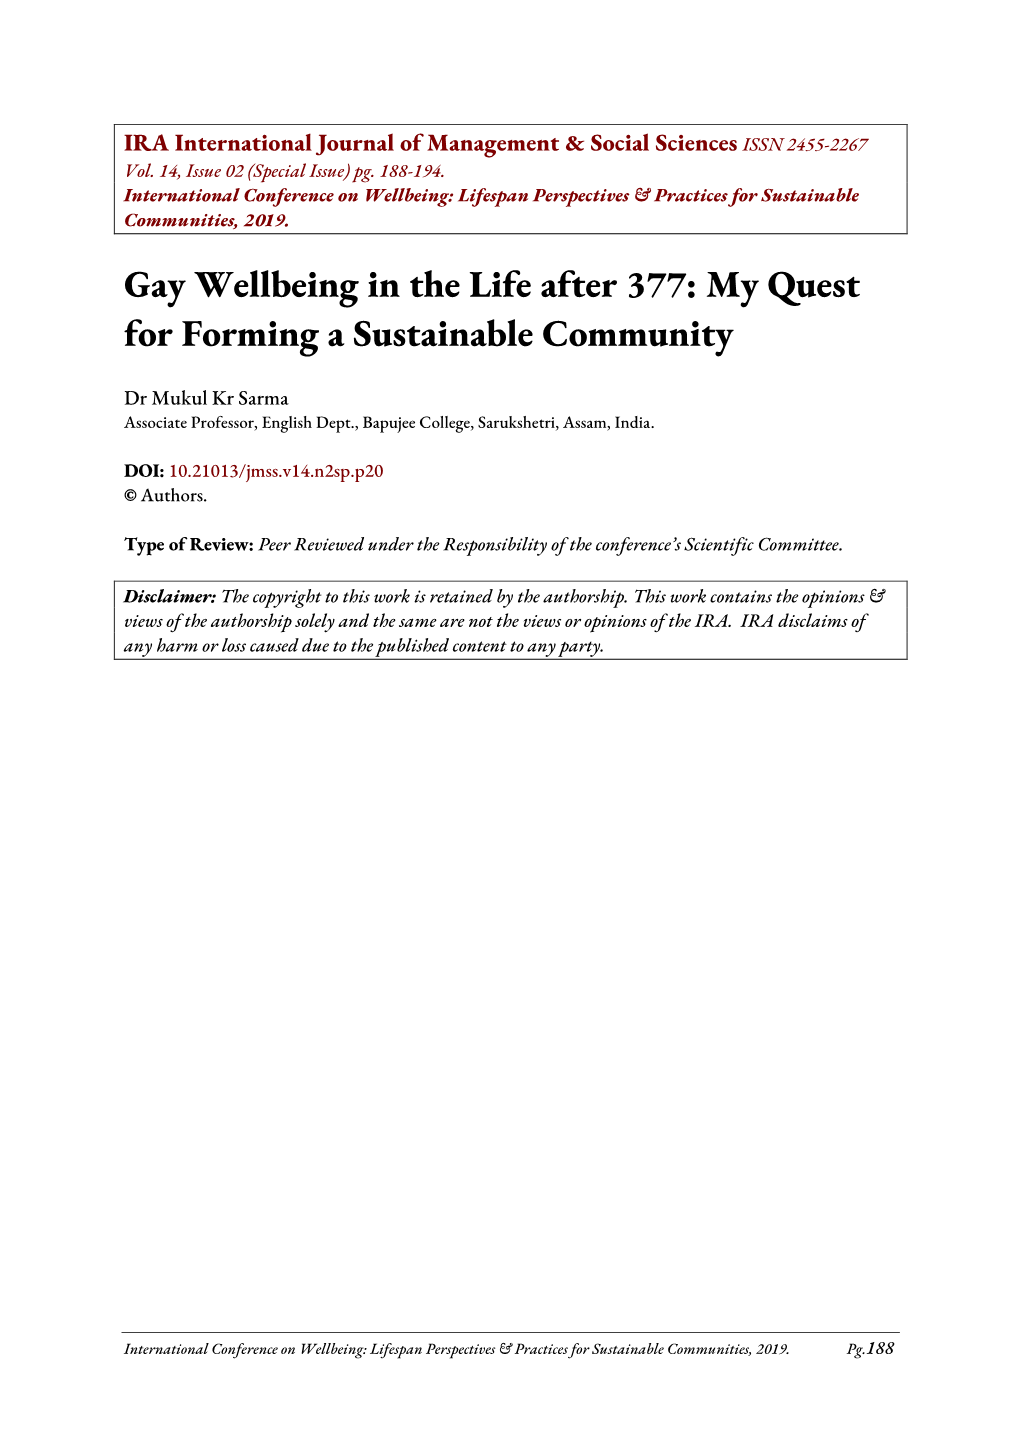 Gay Wellbeing in the Life After 377: My Quest for Forming a Sustainable Community